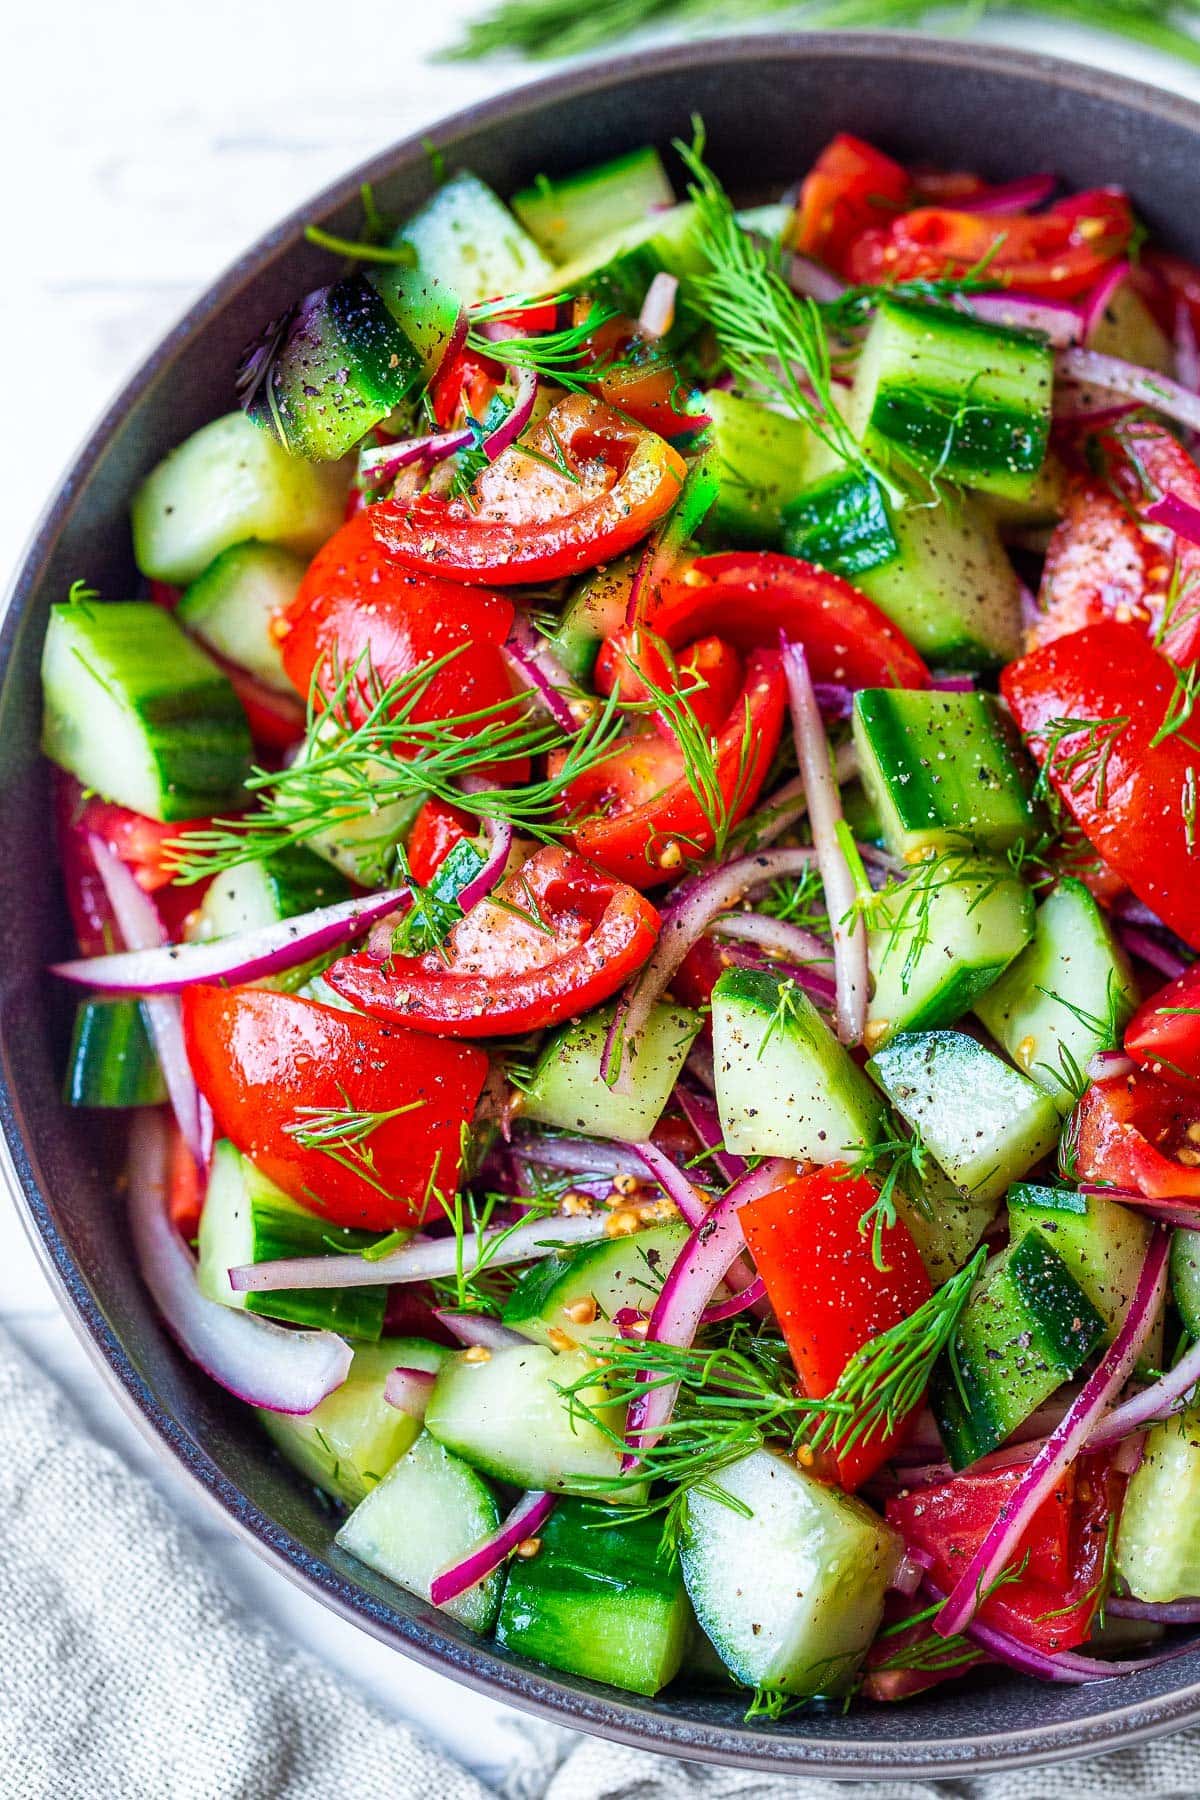 Looking for a light and healthy summer salad? This quick & easy Cucumber Tomato Salad is fresh and light, made with vine-ripe tomatoes and juicy cucumbers, slivers of red onion, and fresh dill, tossed in a red-wine vinaigrette. 